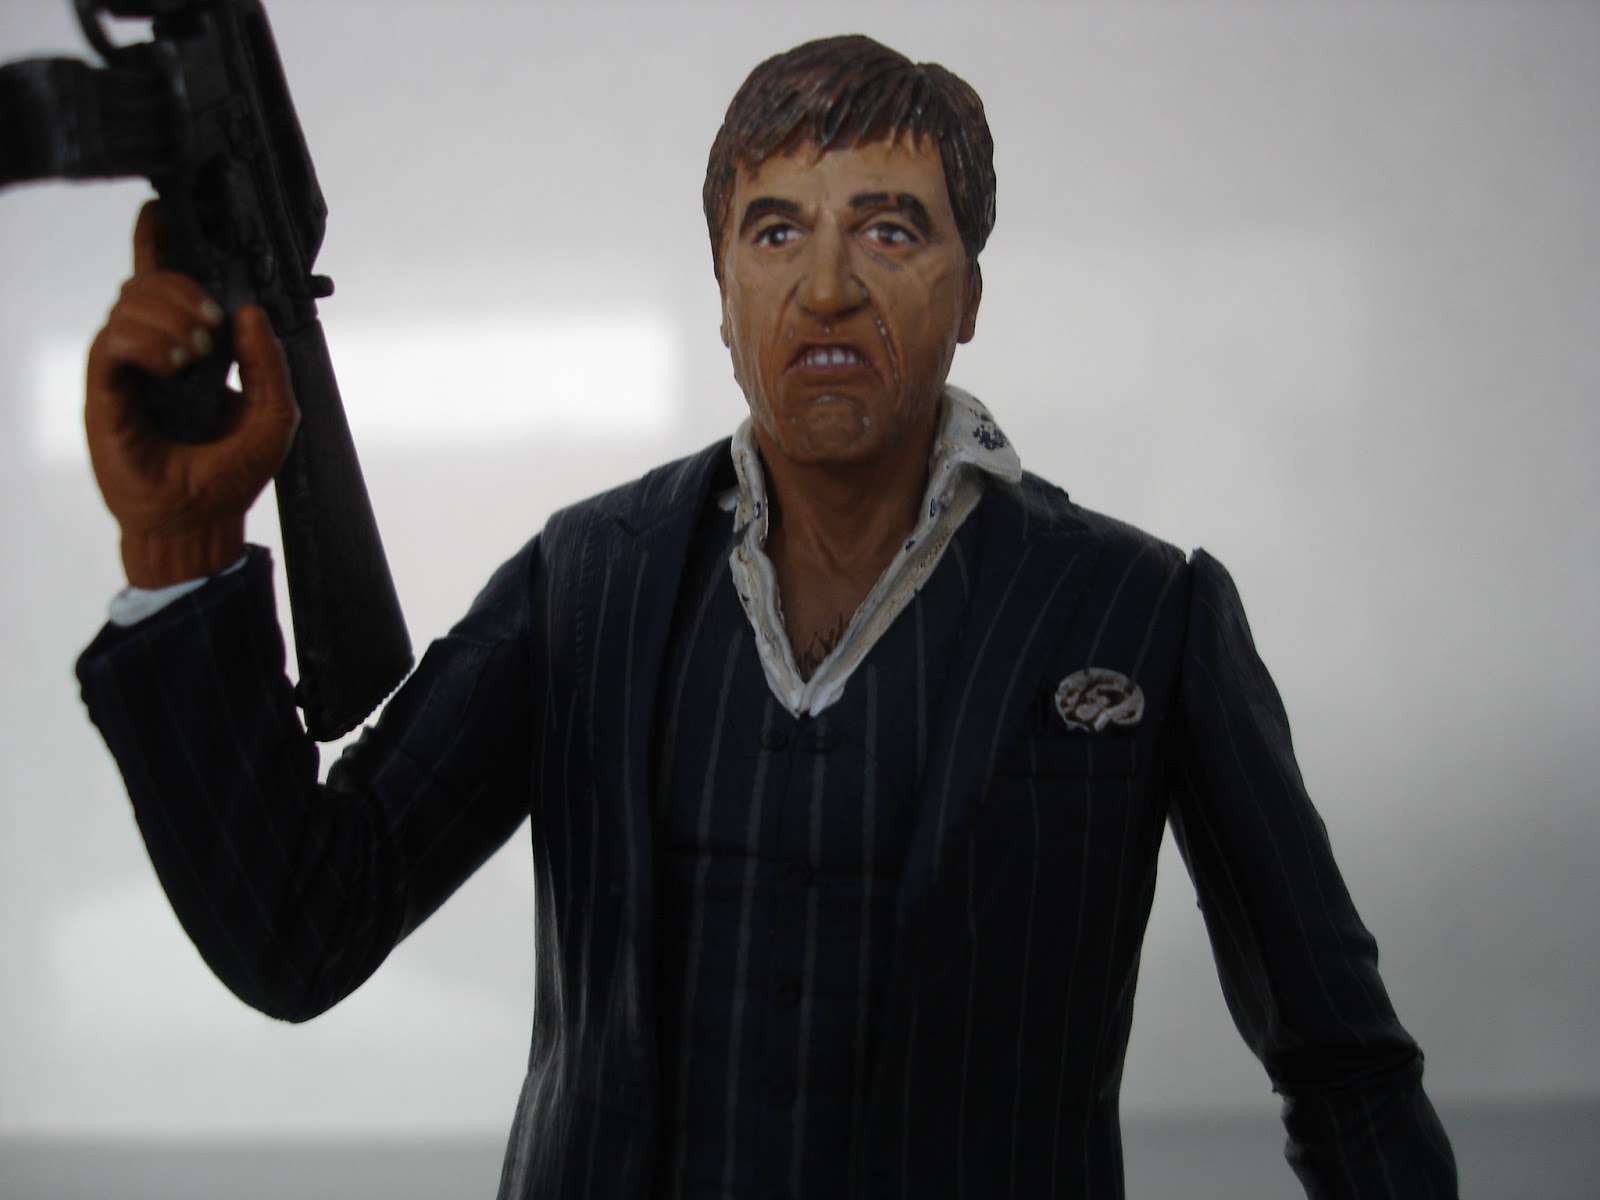 Scarface is an unforgettable icon of money , power and extravagance